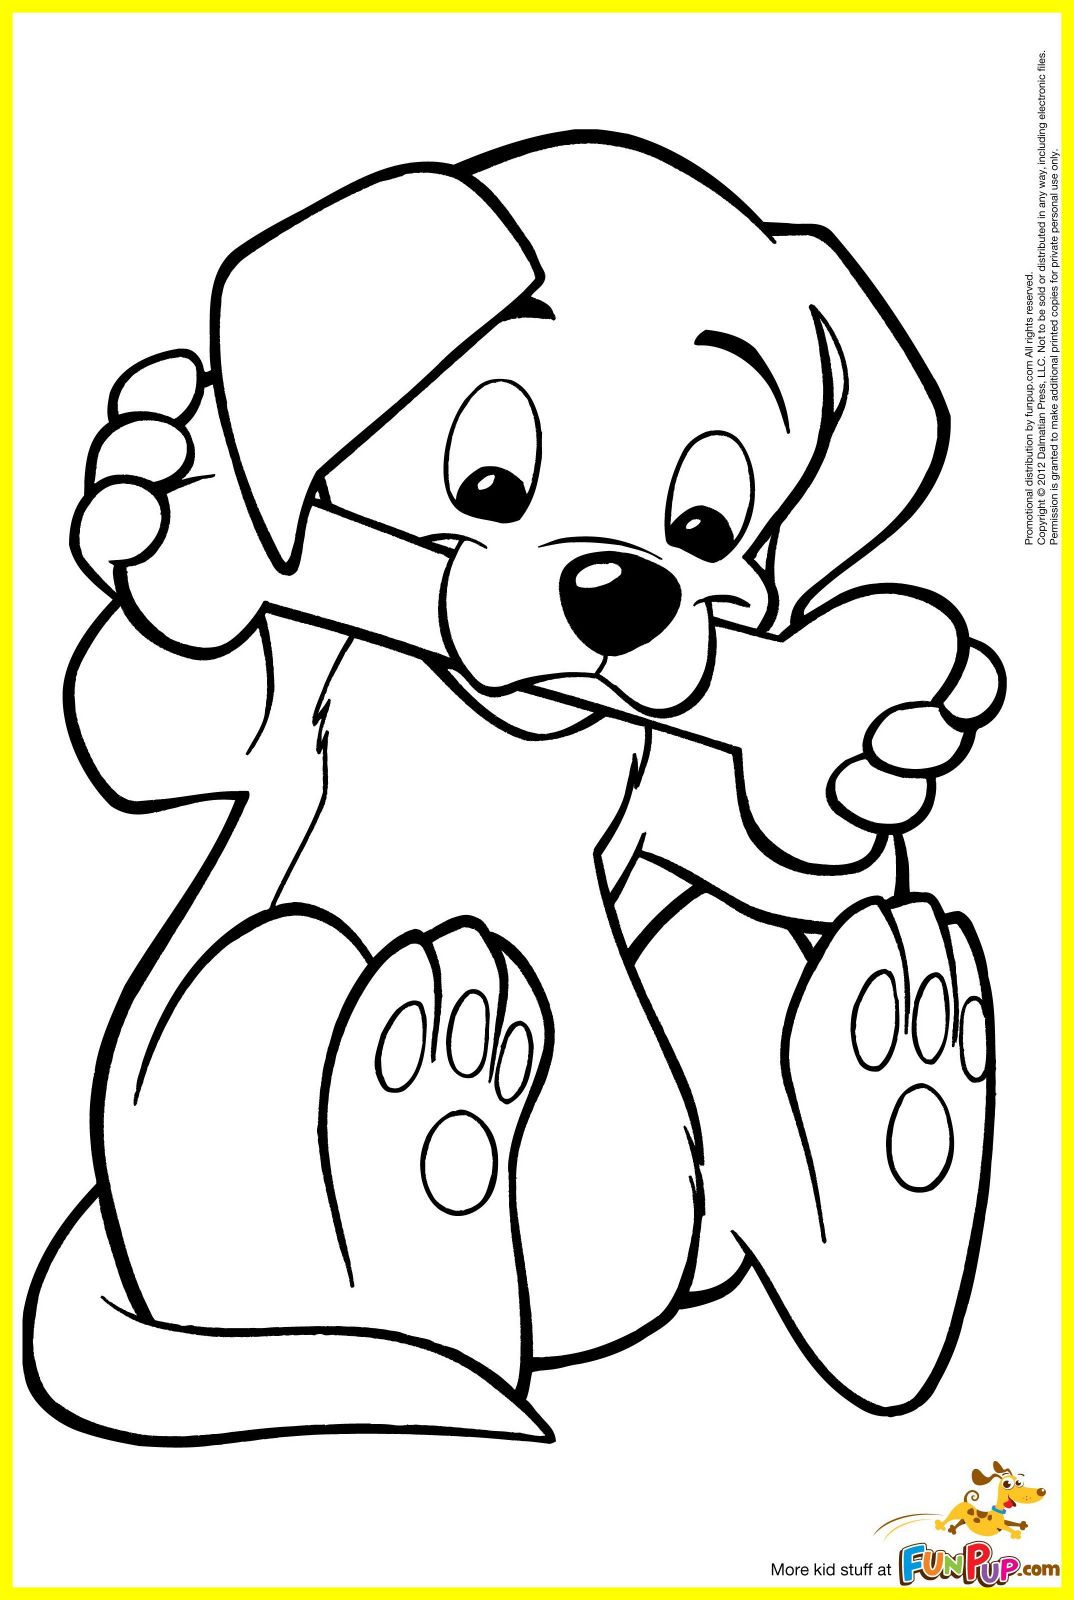 Cute Christmas Puppy Coloring Pages At Getcolorings.com | Free